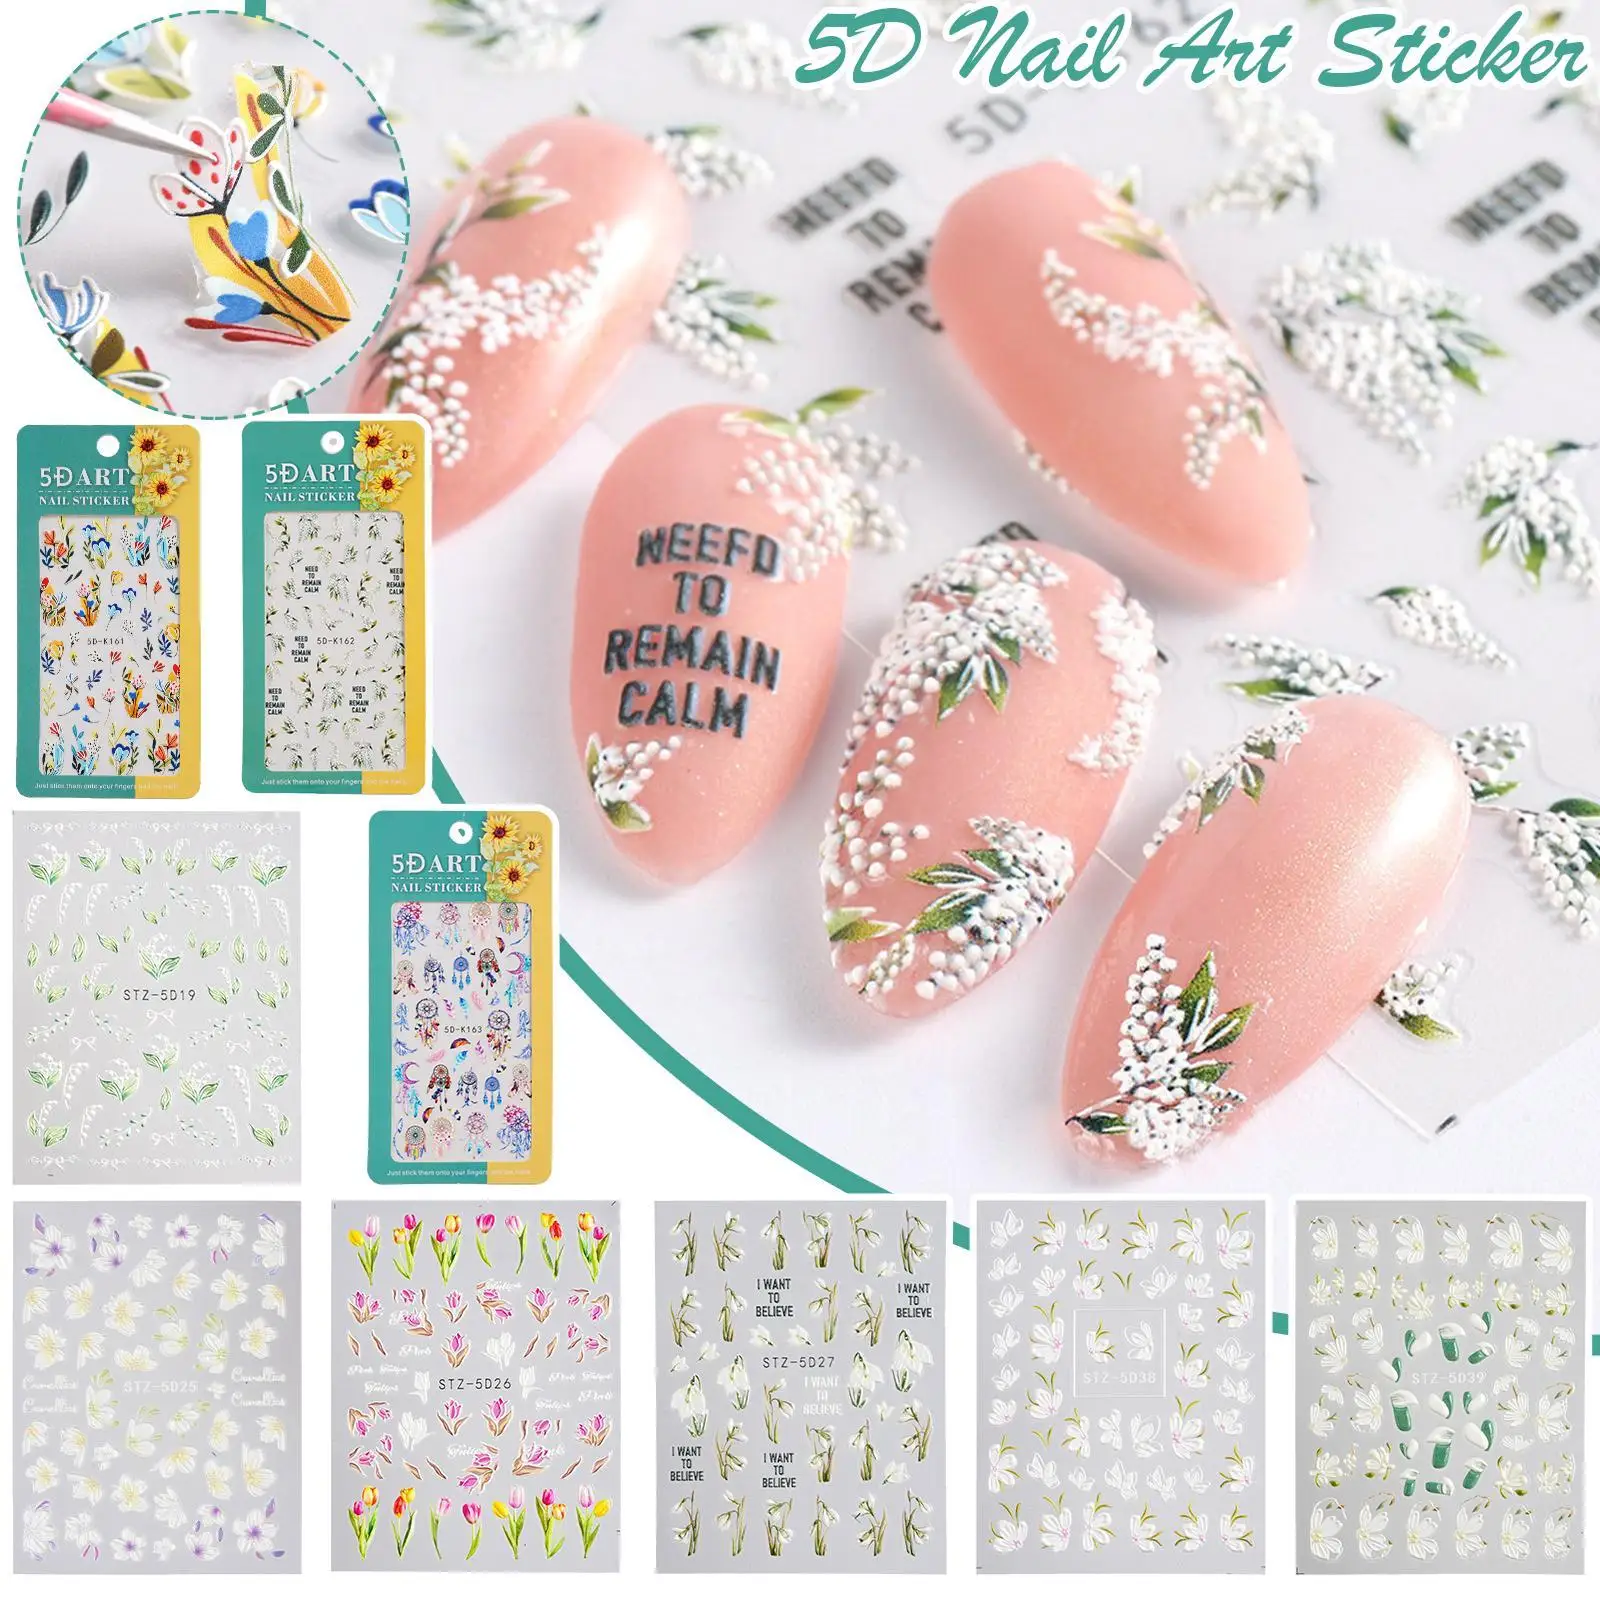 

5D Nail Art Stickers White Embossed Lily Of The Valley Tulip Dreamcatcher Gel Polish Wedding Flower Engraved Nail Design Decor